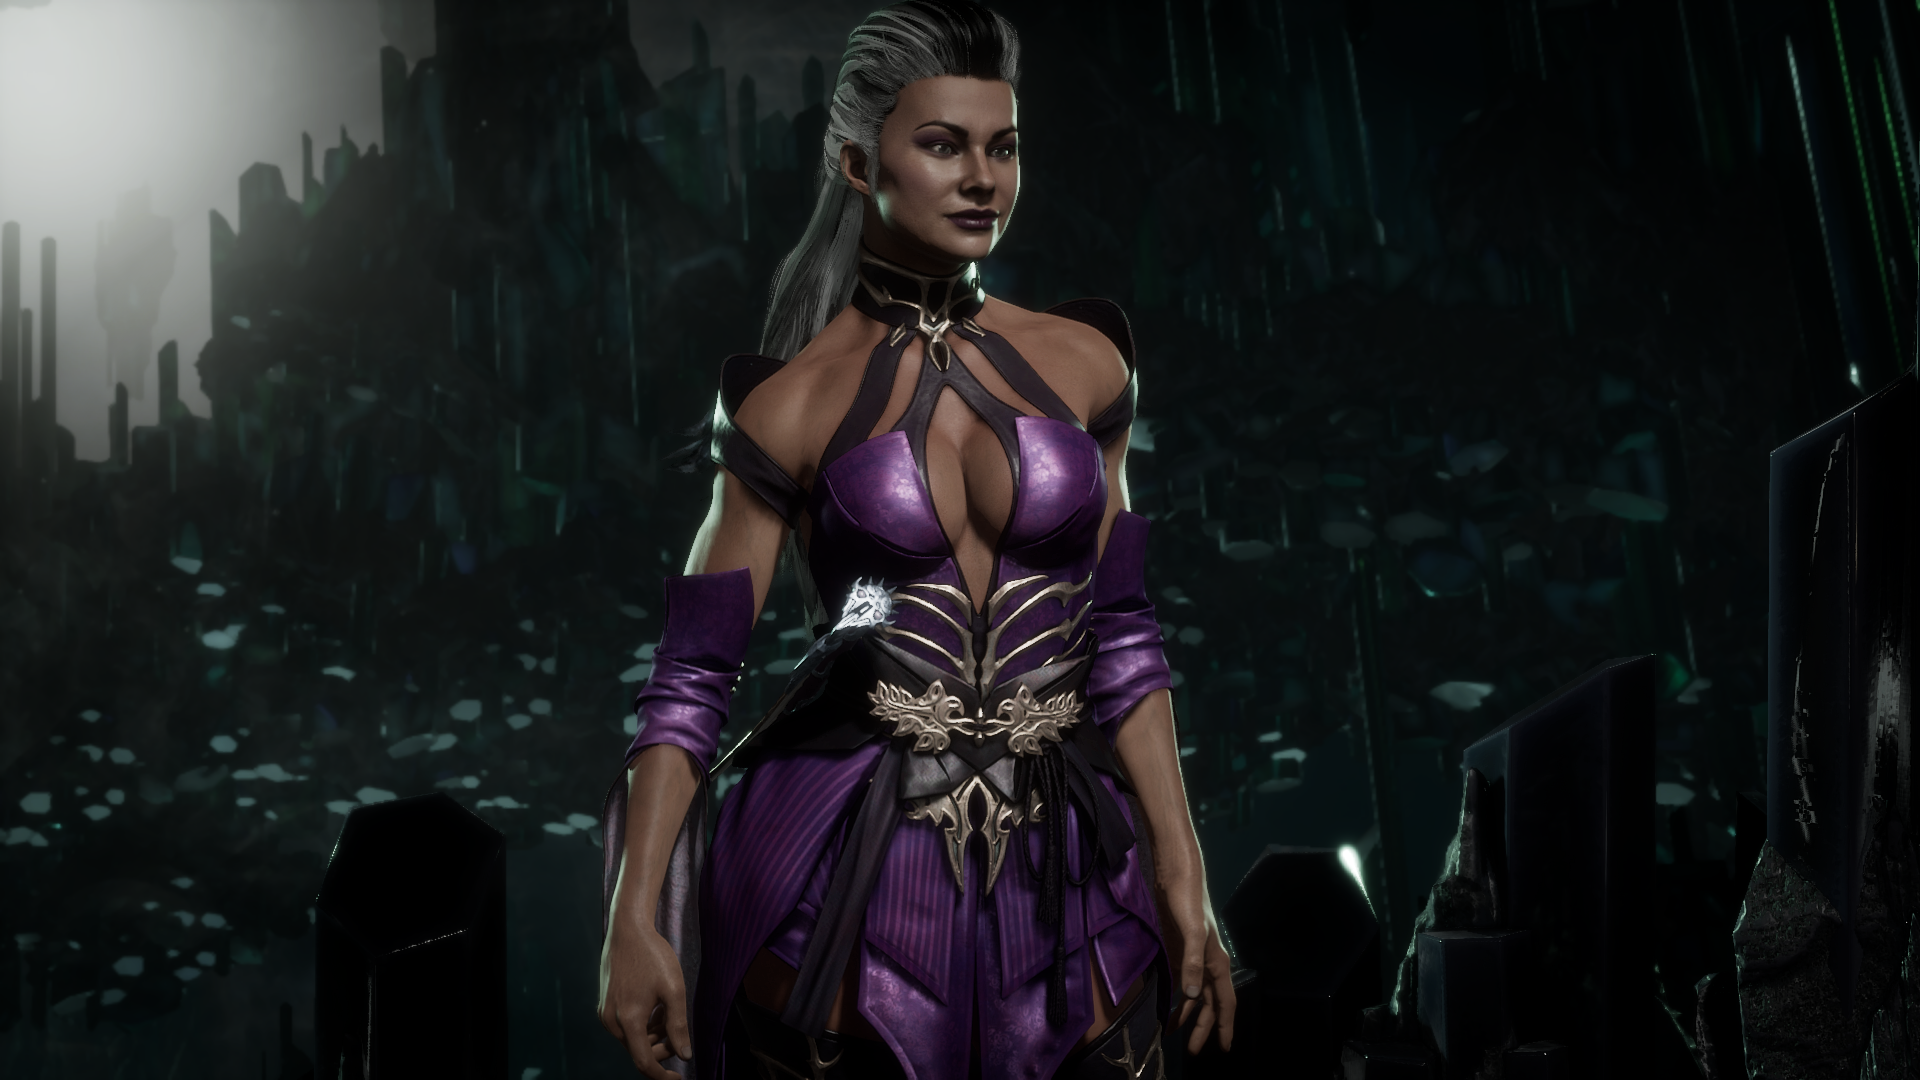 NRS did Such a Fantastic Job With Sindel in MK11.